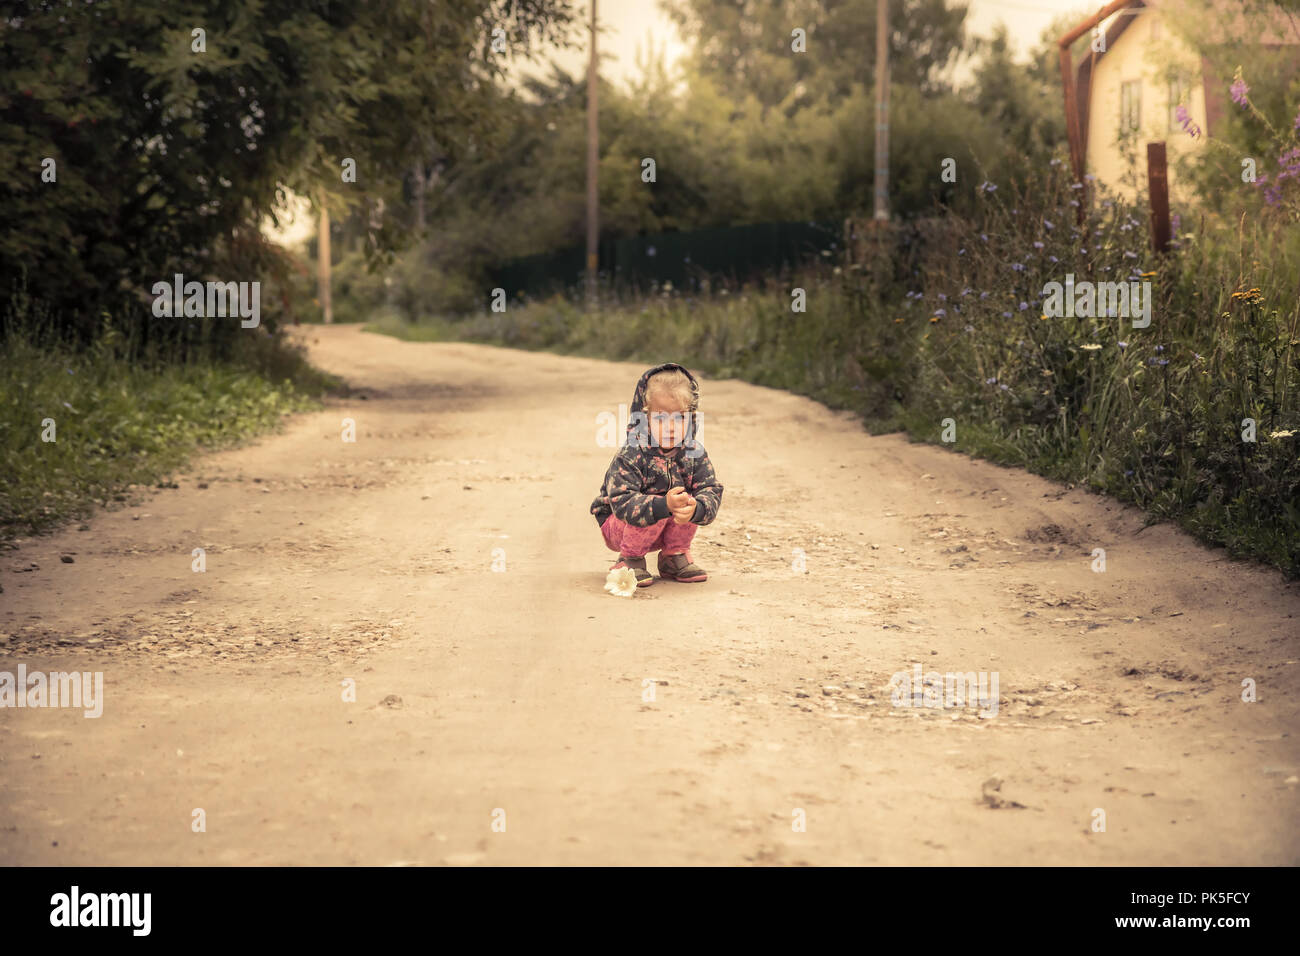 Lonely lost kid girl on rural road in countryside concept carefree childhood in countryside rustic lifestyle Stock Photo